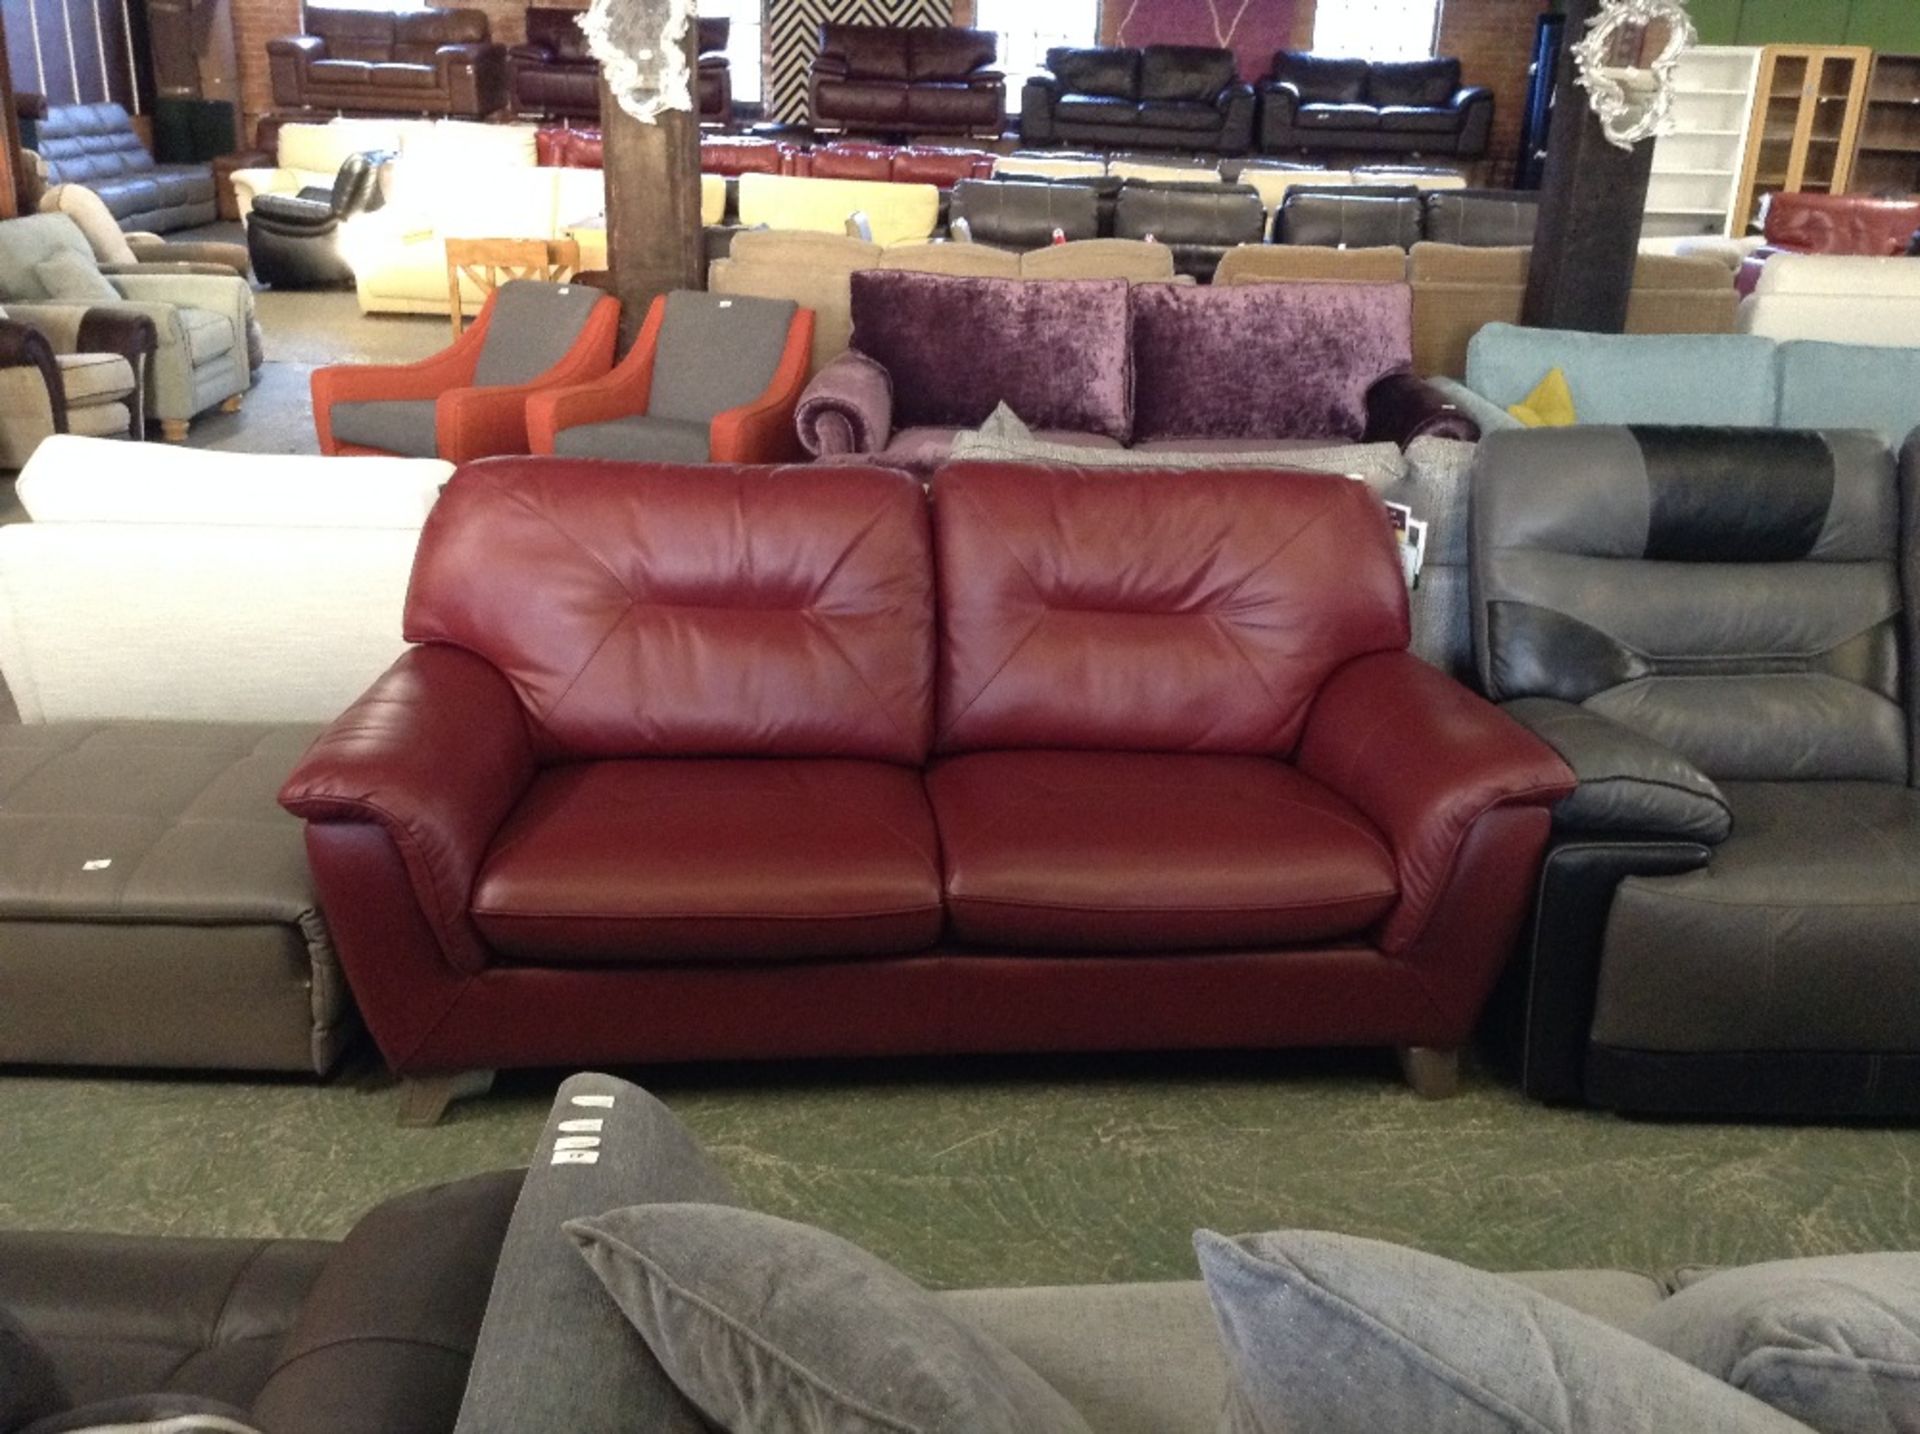 RED LEATHER 3 SEATER SOFA (21234)